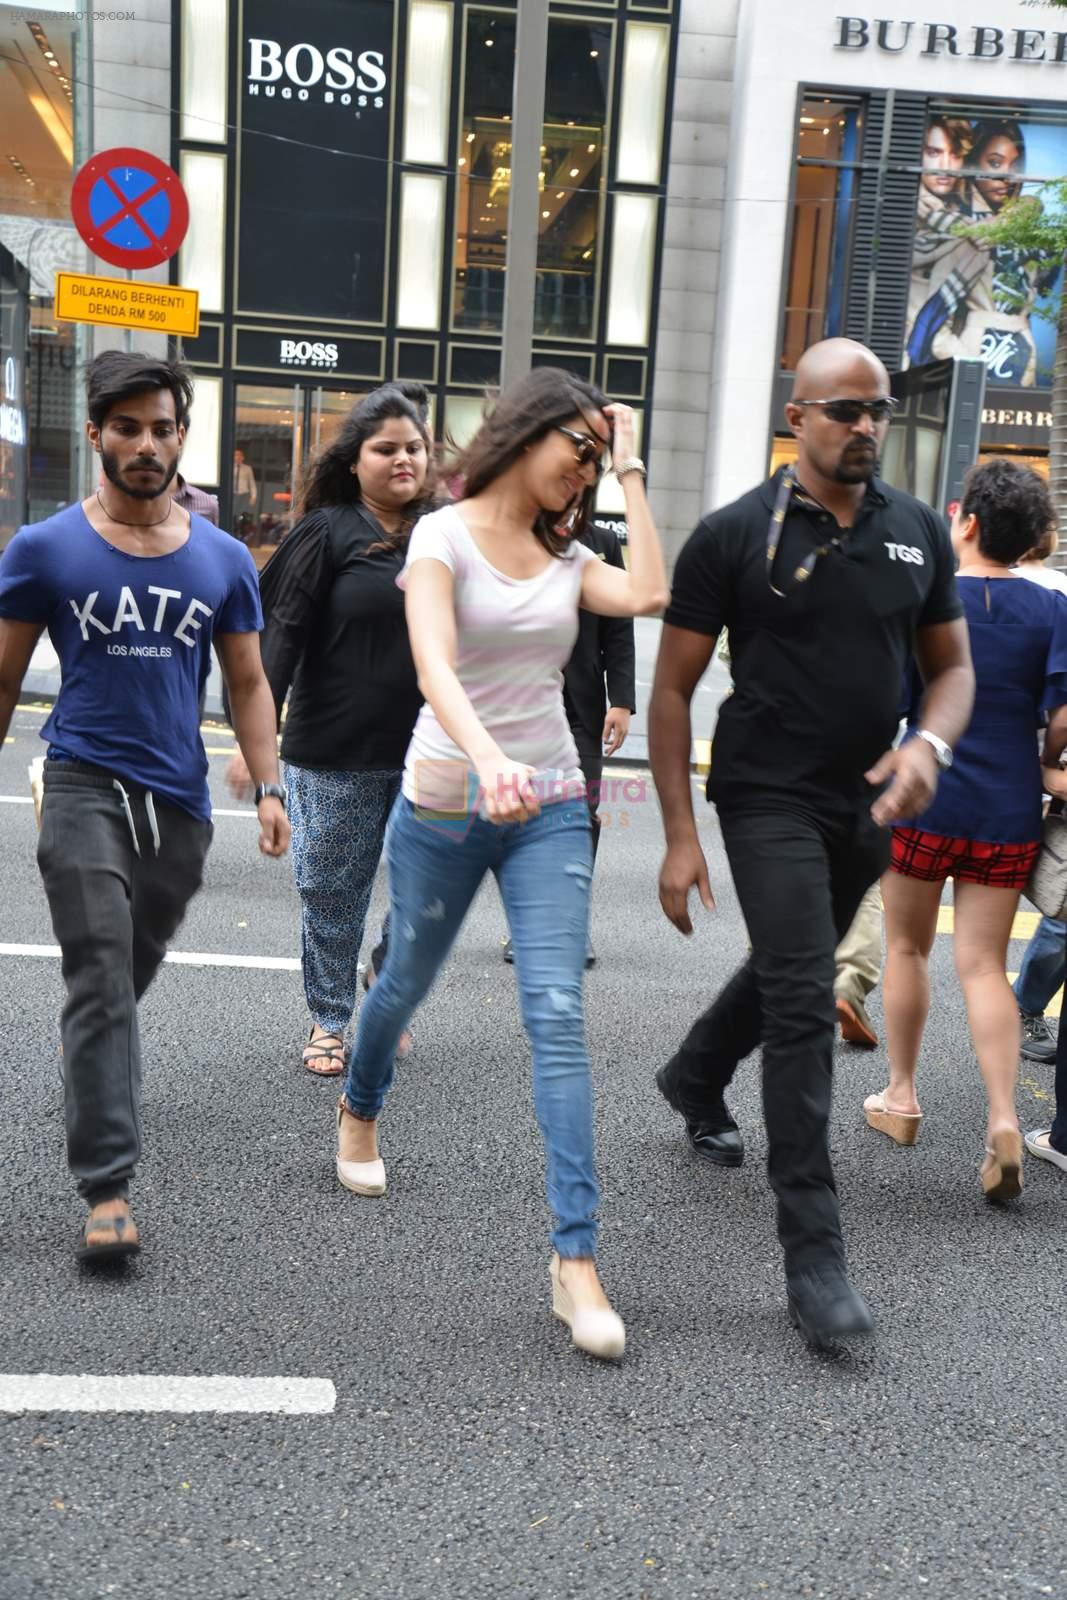 Shraddha Kapoor almost stopped traffic as she stops cars passing while she crosses in KL, Malaysia on 11th June 2015